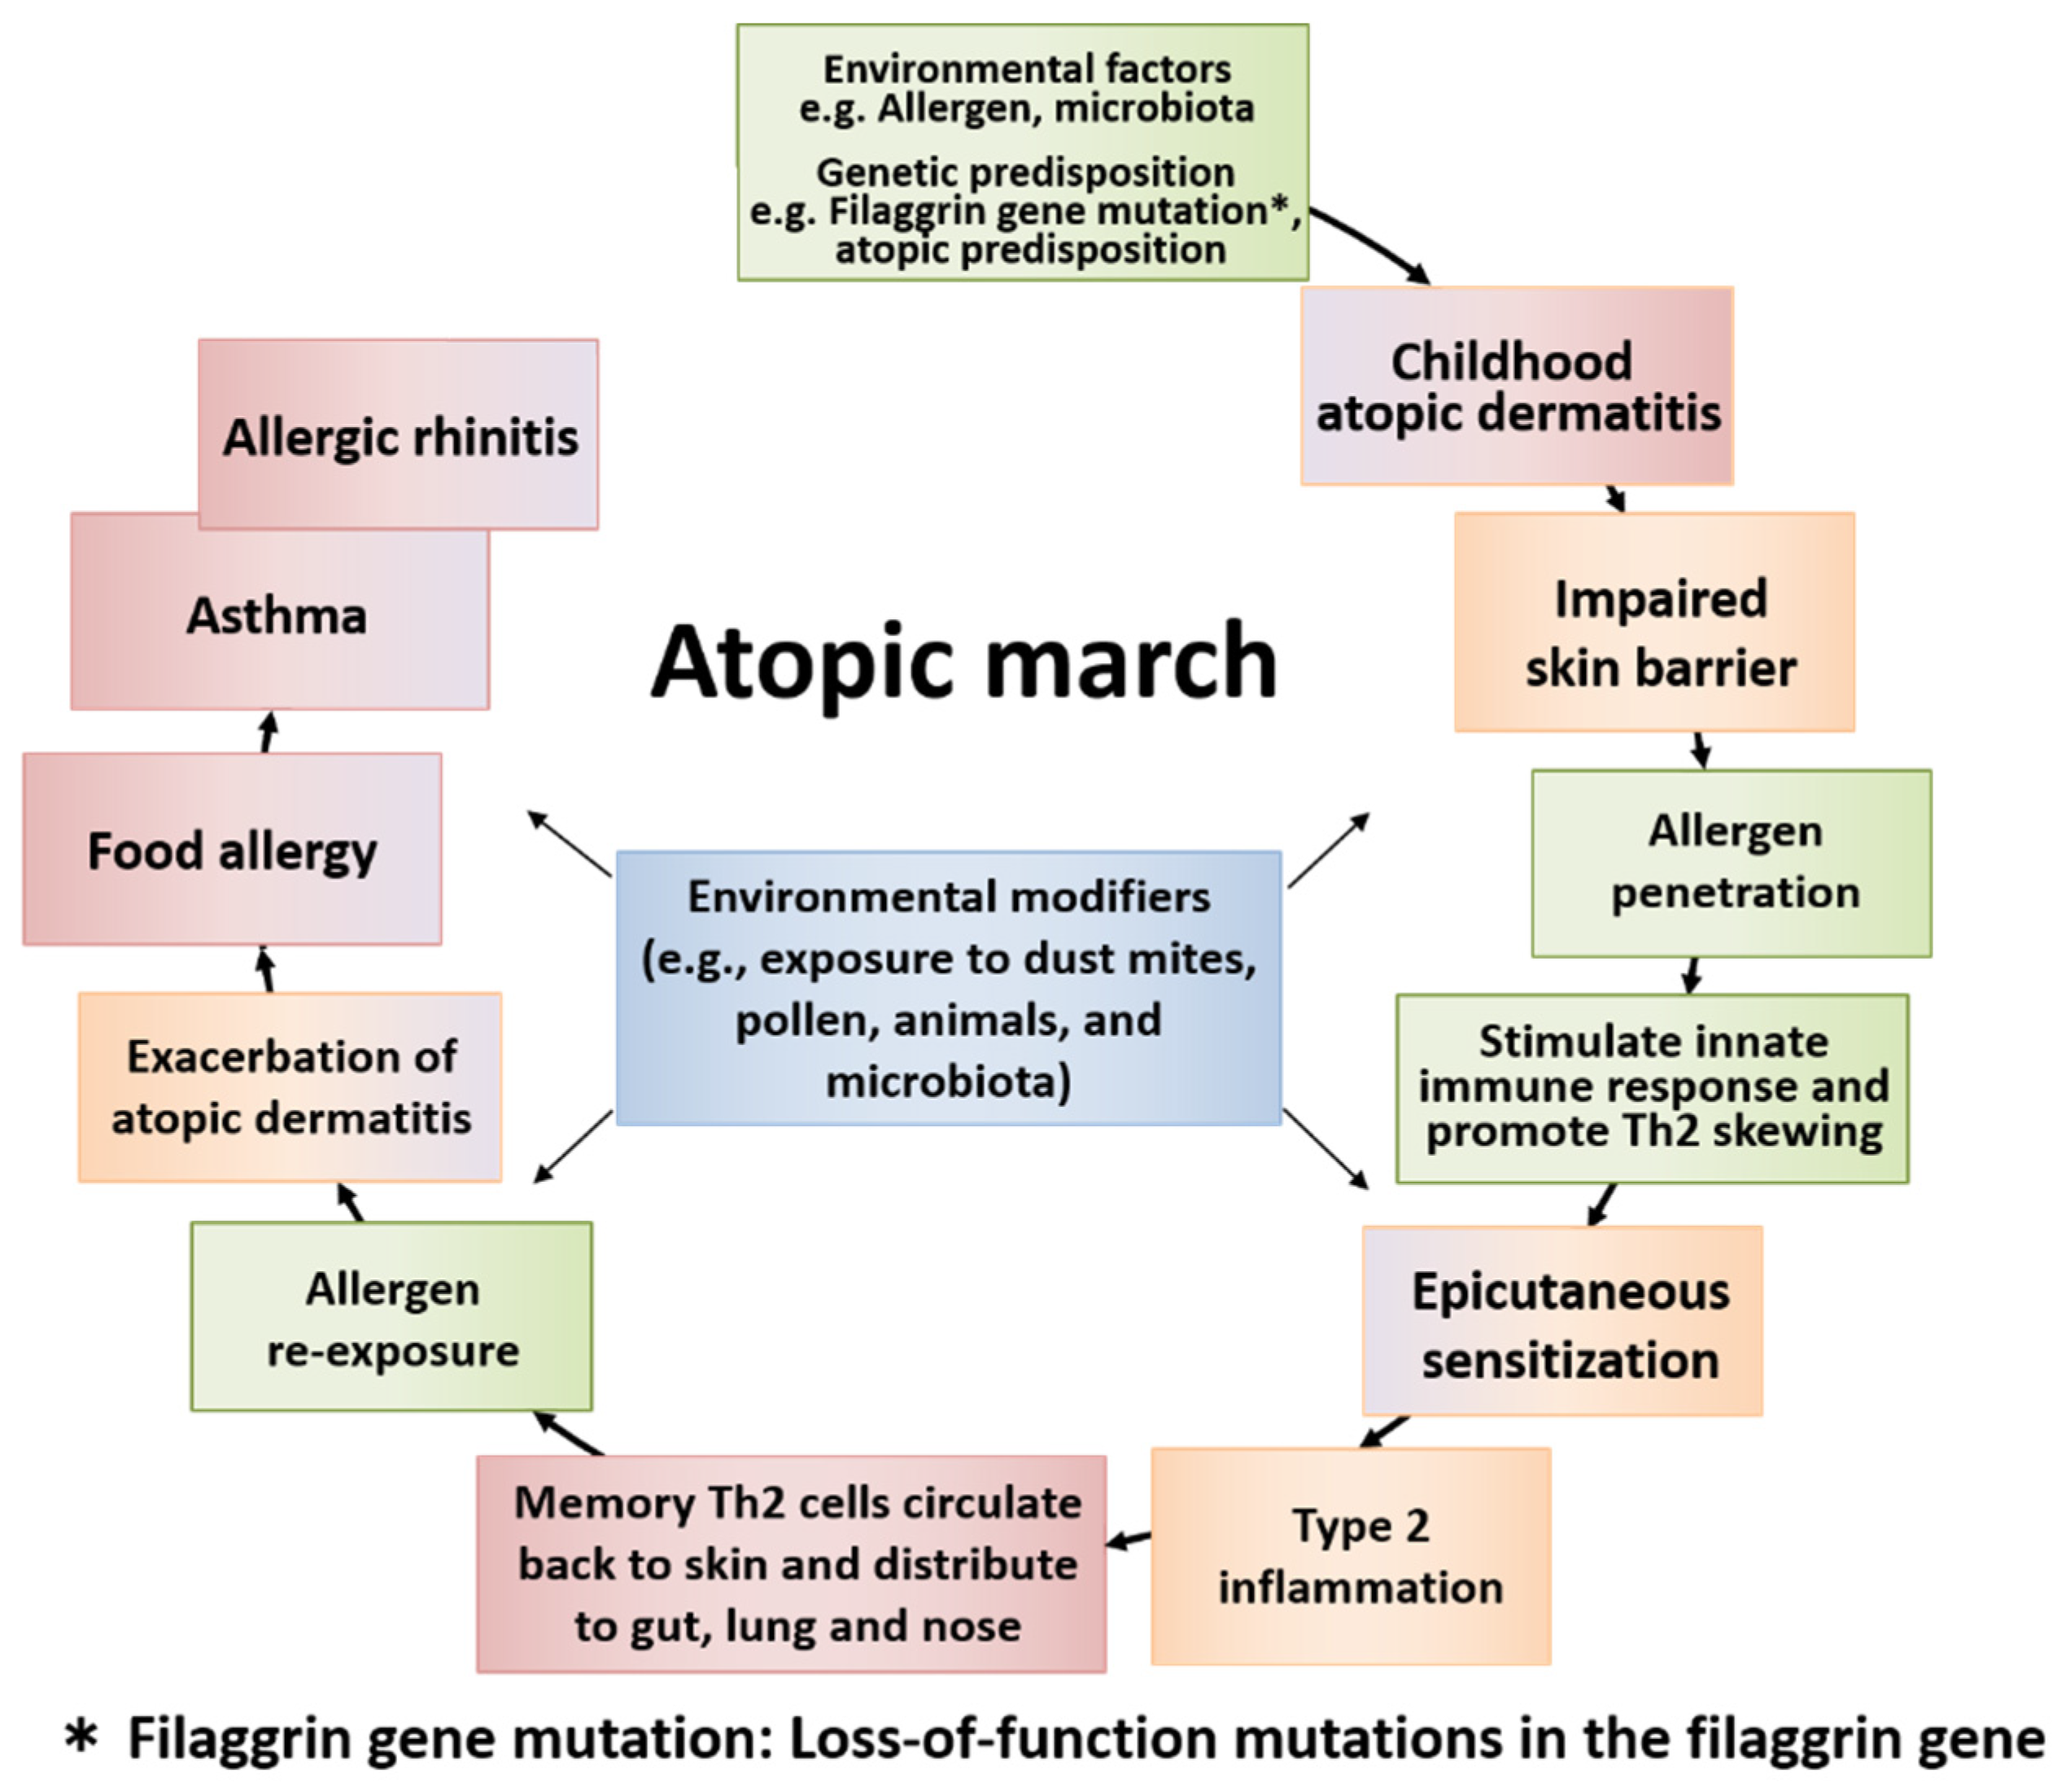 research progress in atopic march